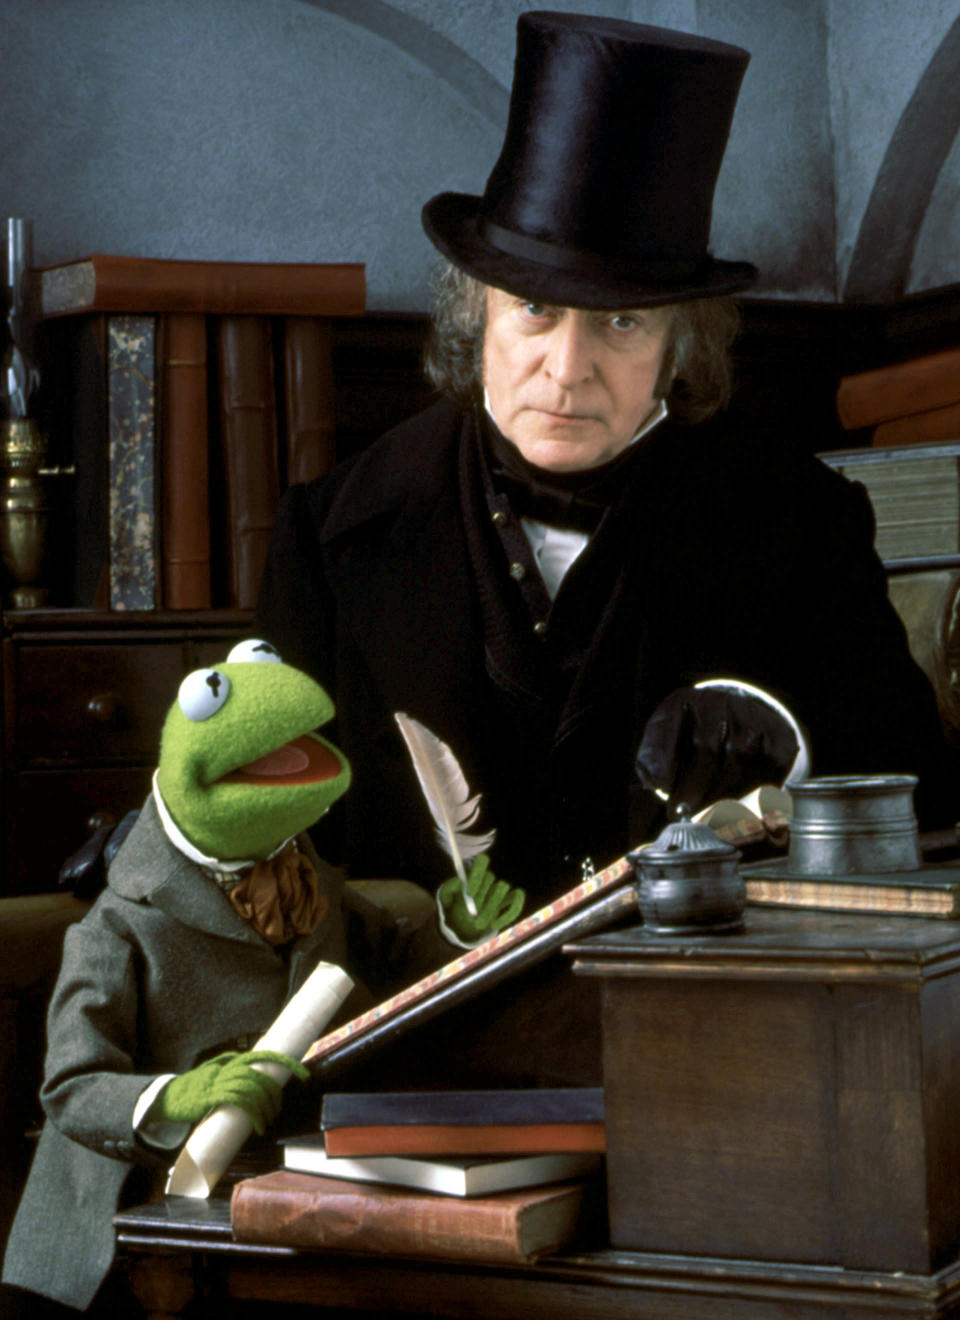 Scrooge and Kermit sitting at a desk